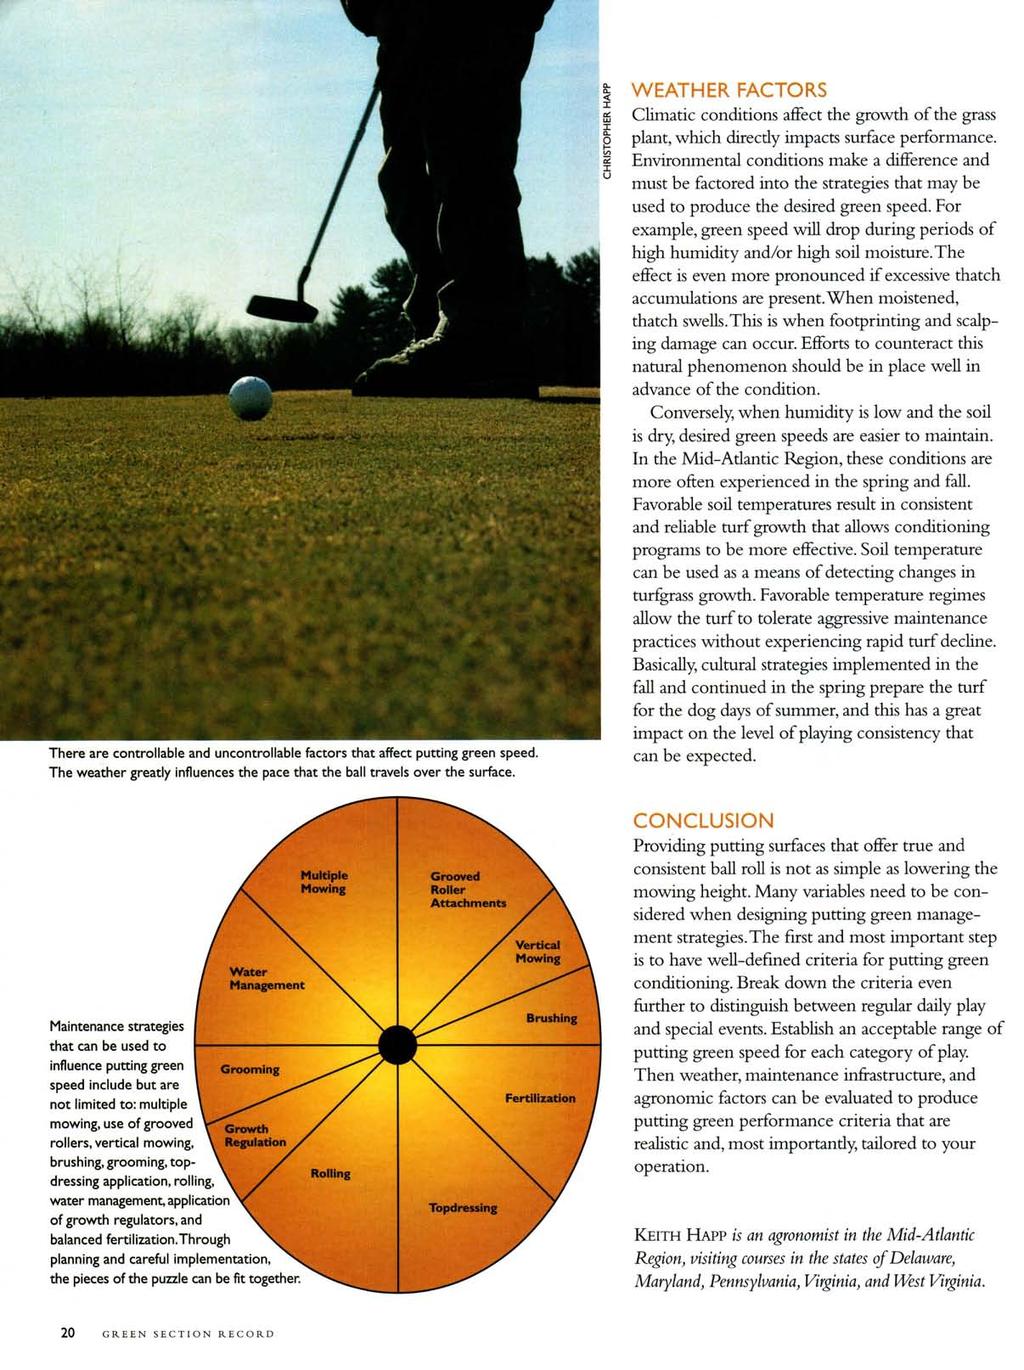 There are controllable and uncontrollable factors that affect putting green speed. The weather greatly influences the pace that the ball travels over the surface.